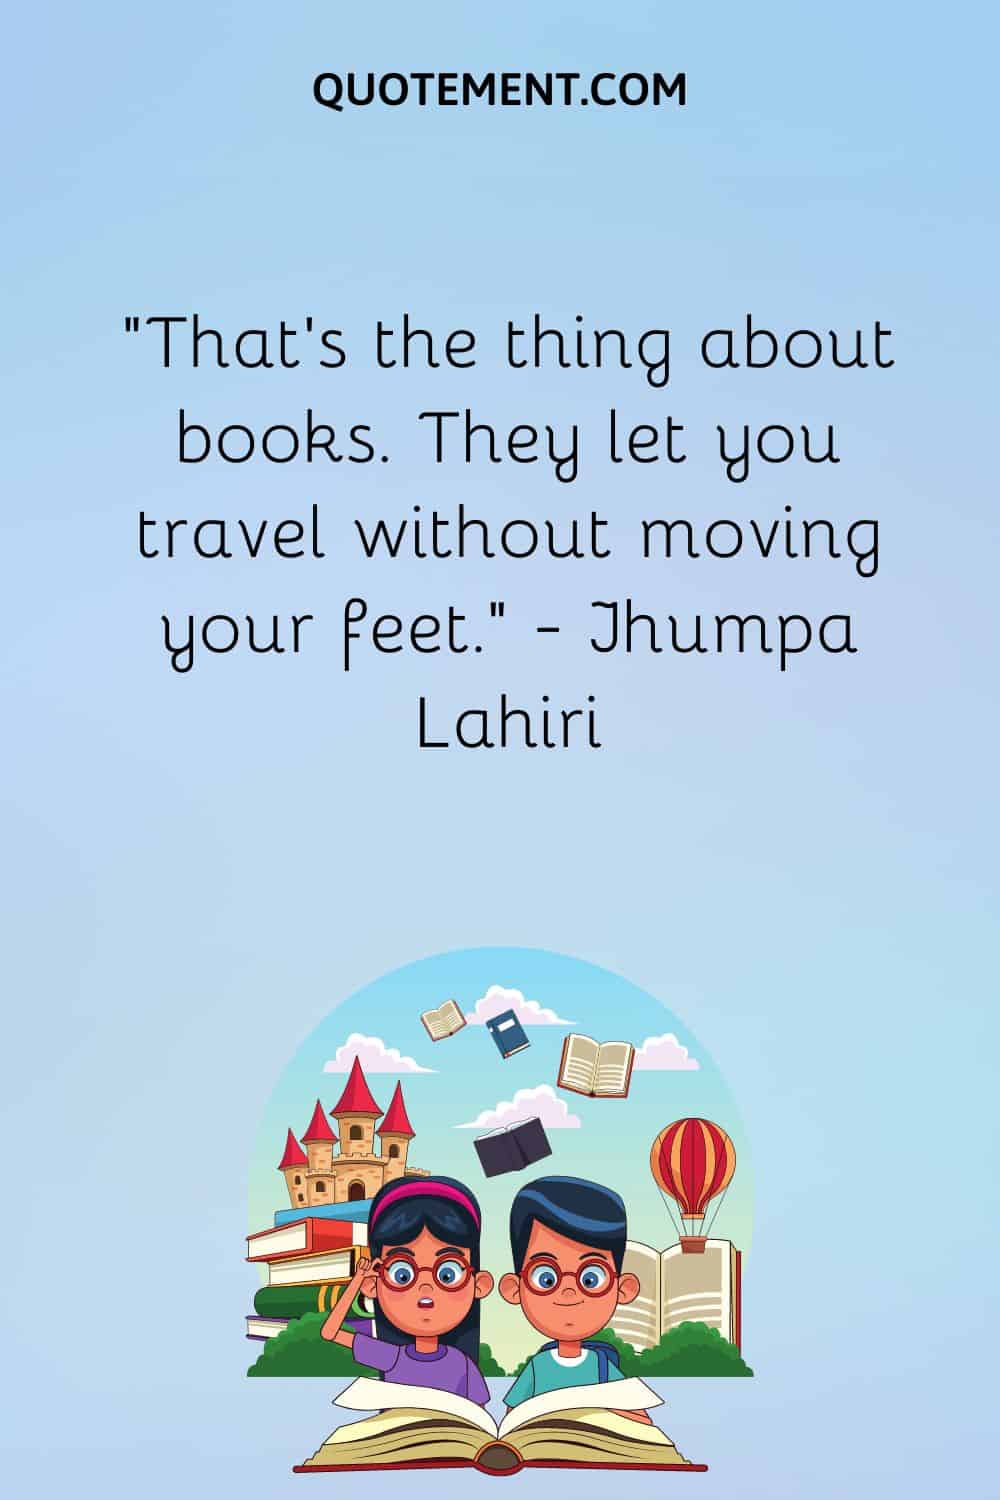 “That’s the thing about books. They let you travel without moving your feet.” — Jhumpa Lahiri